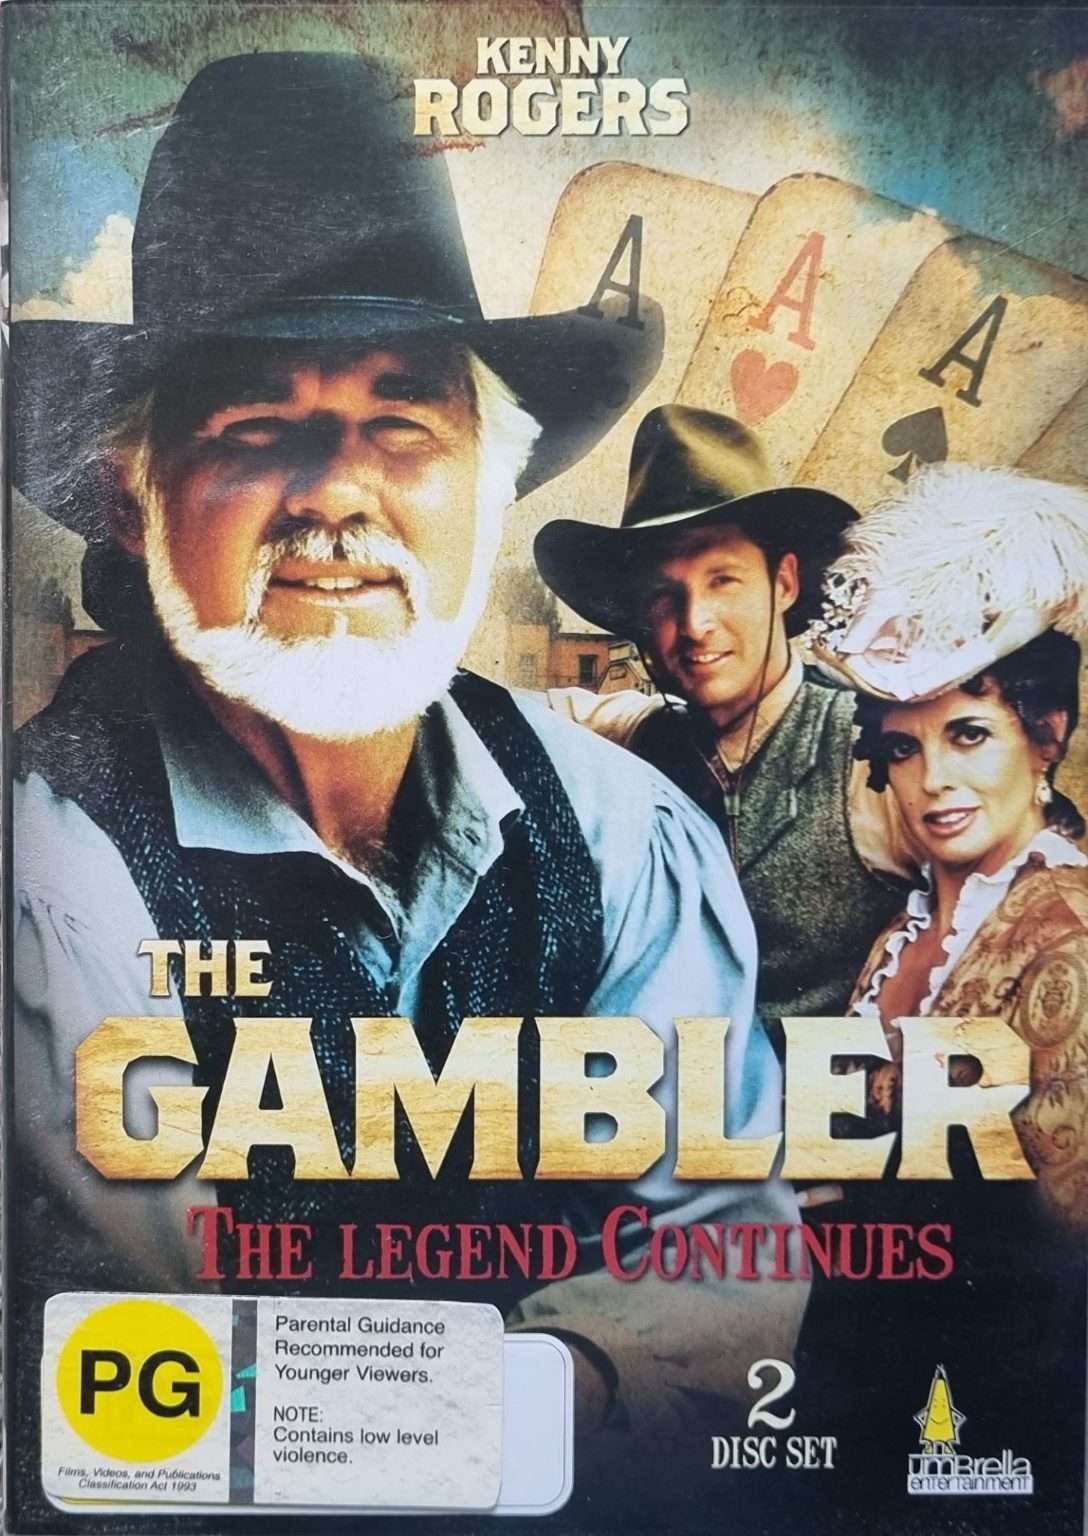 The Gambler - The Legacy Continues